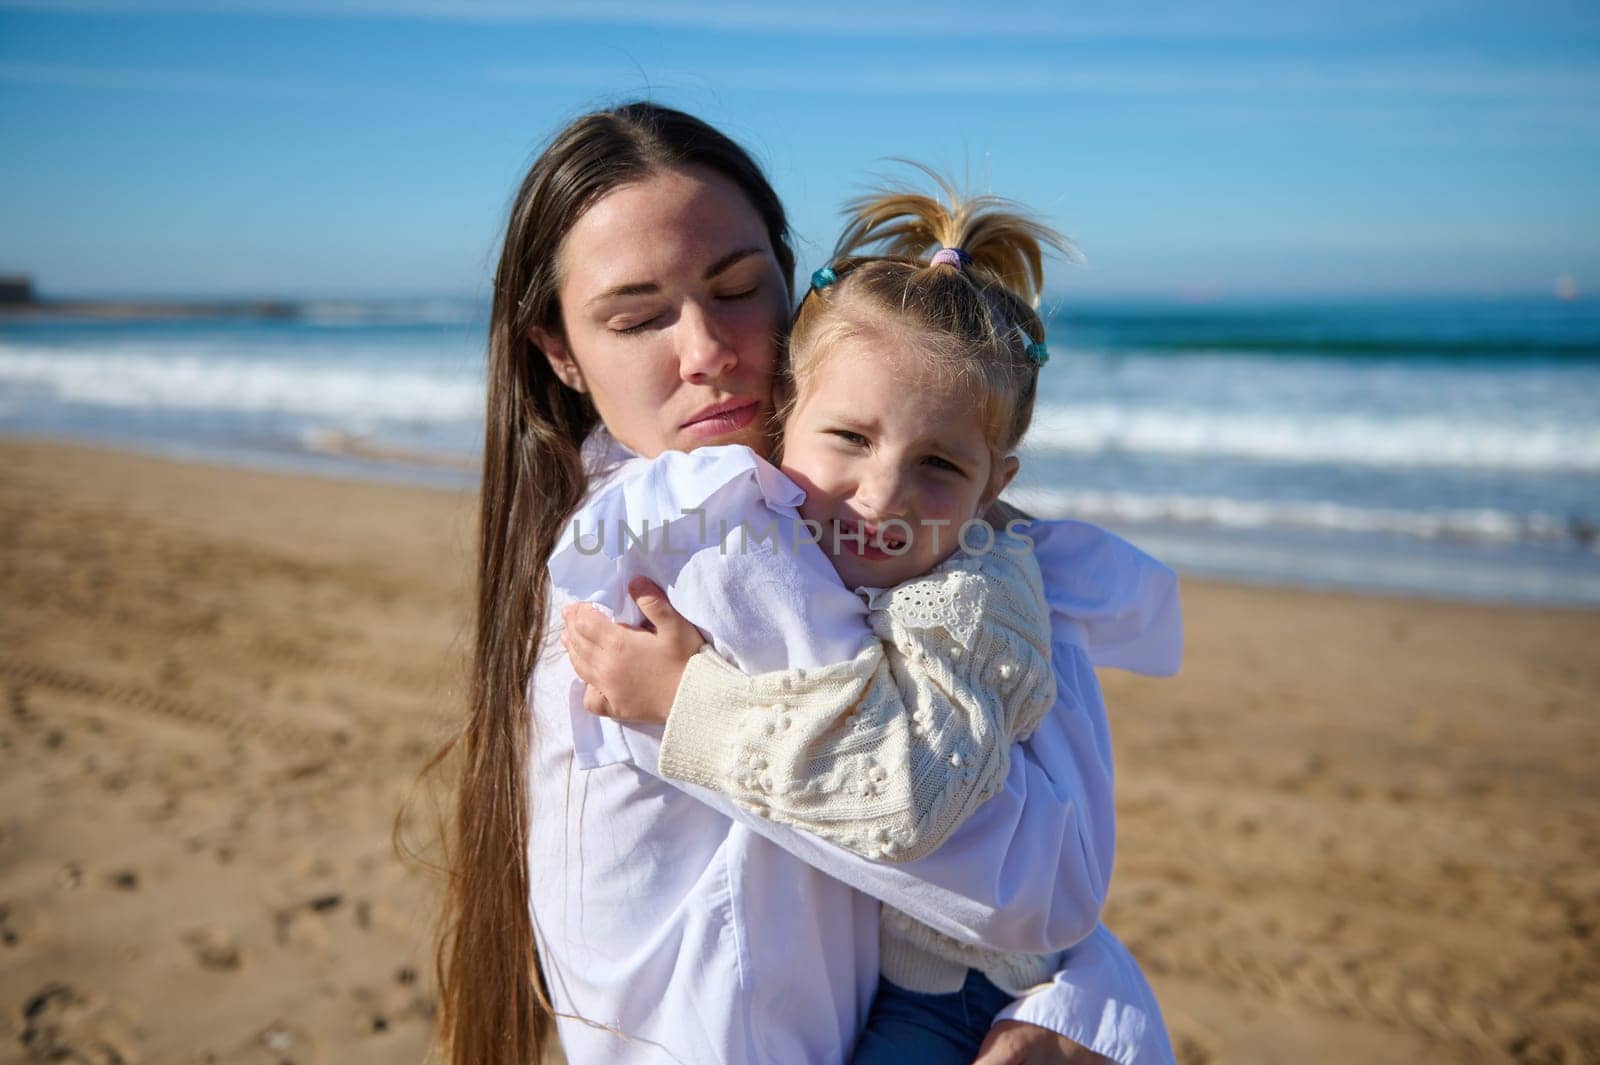 Caucasian delightful young mother gently hugging her little kid girl, standing with her eyes closed on the sandy beach, against the background of beautiful waves pounding on the Atlantic Sea shore